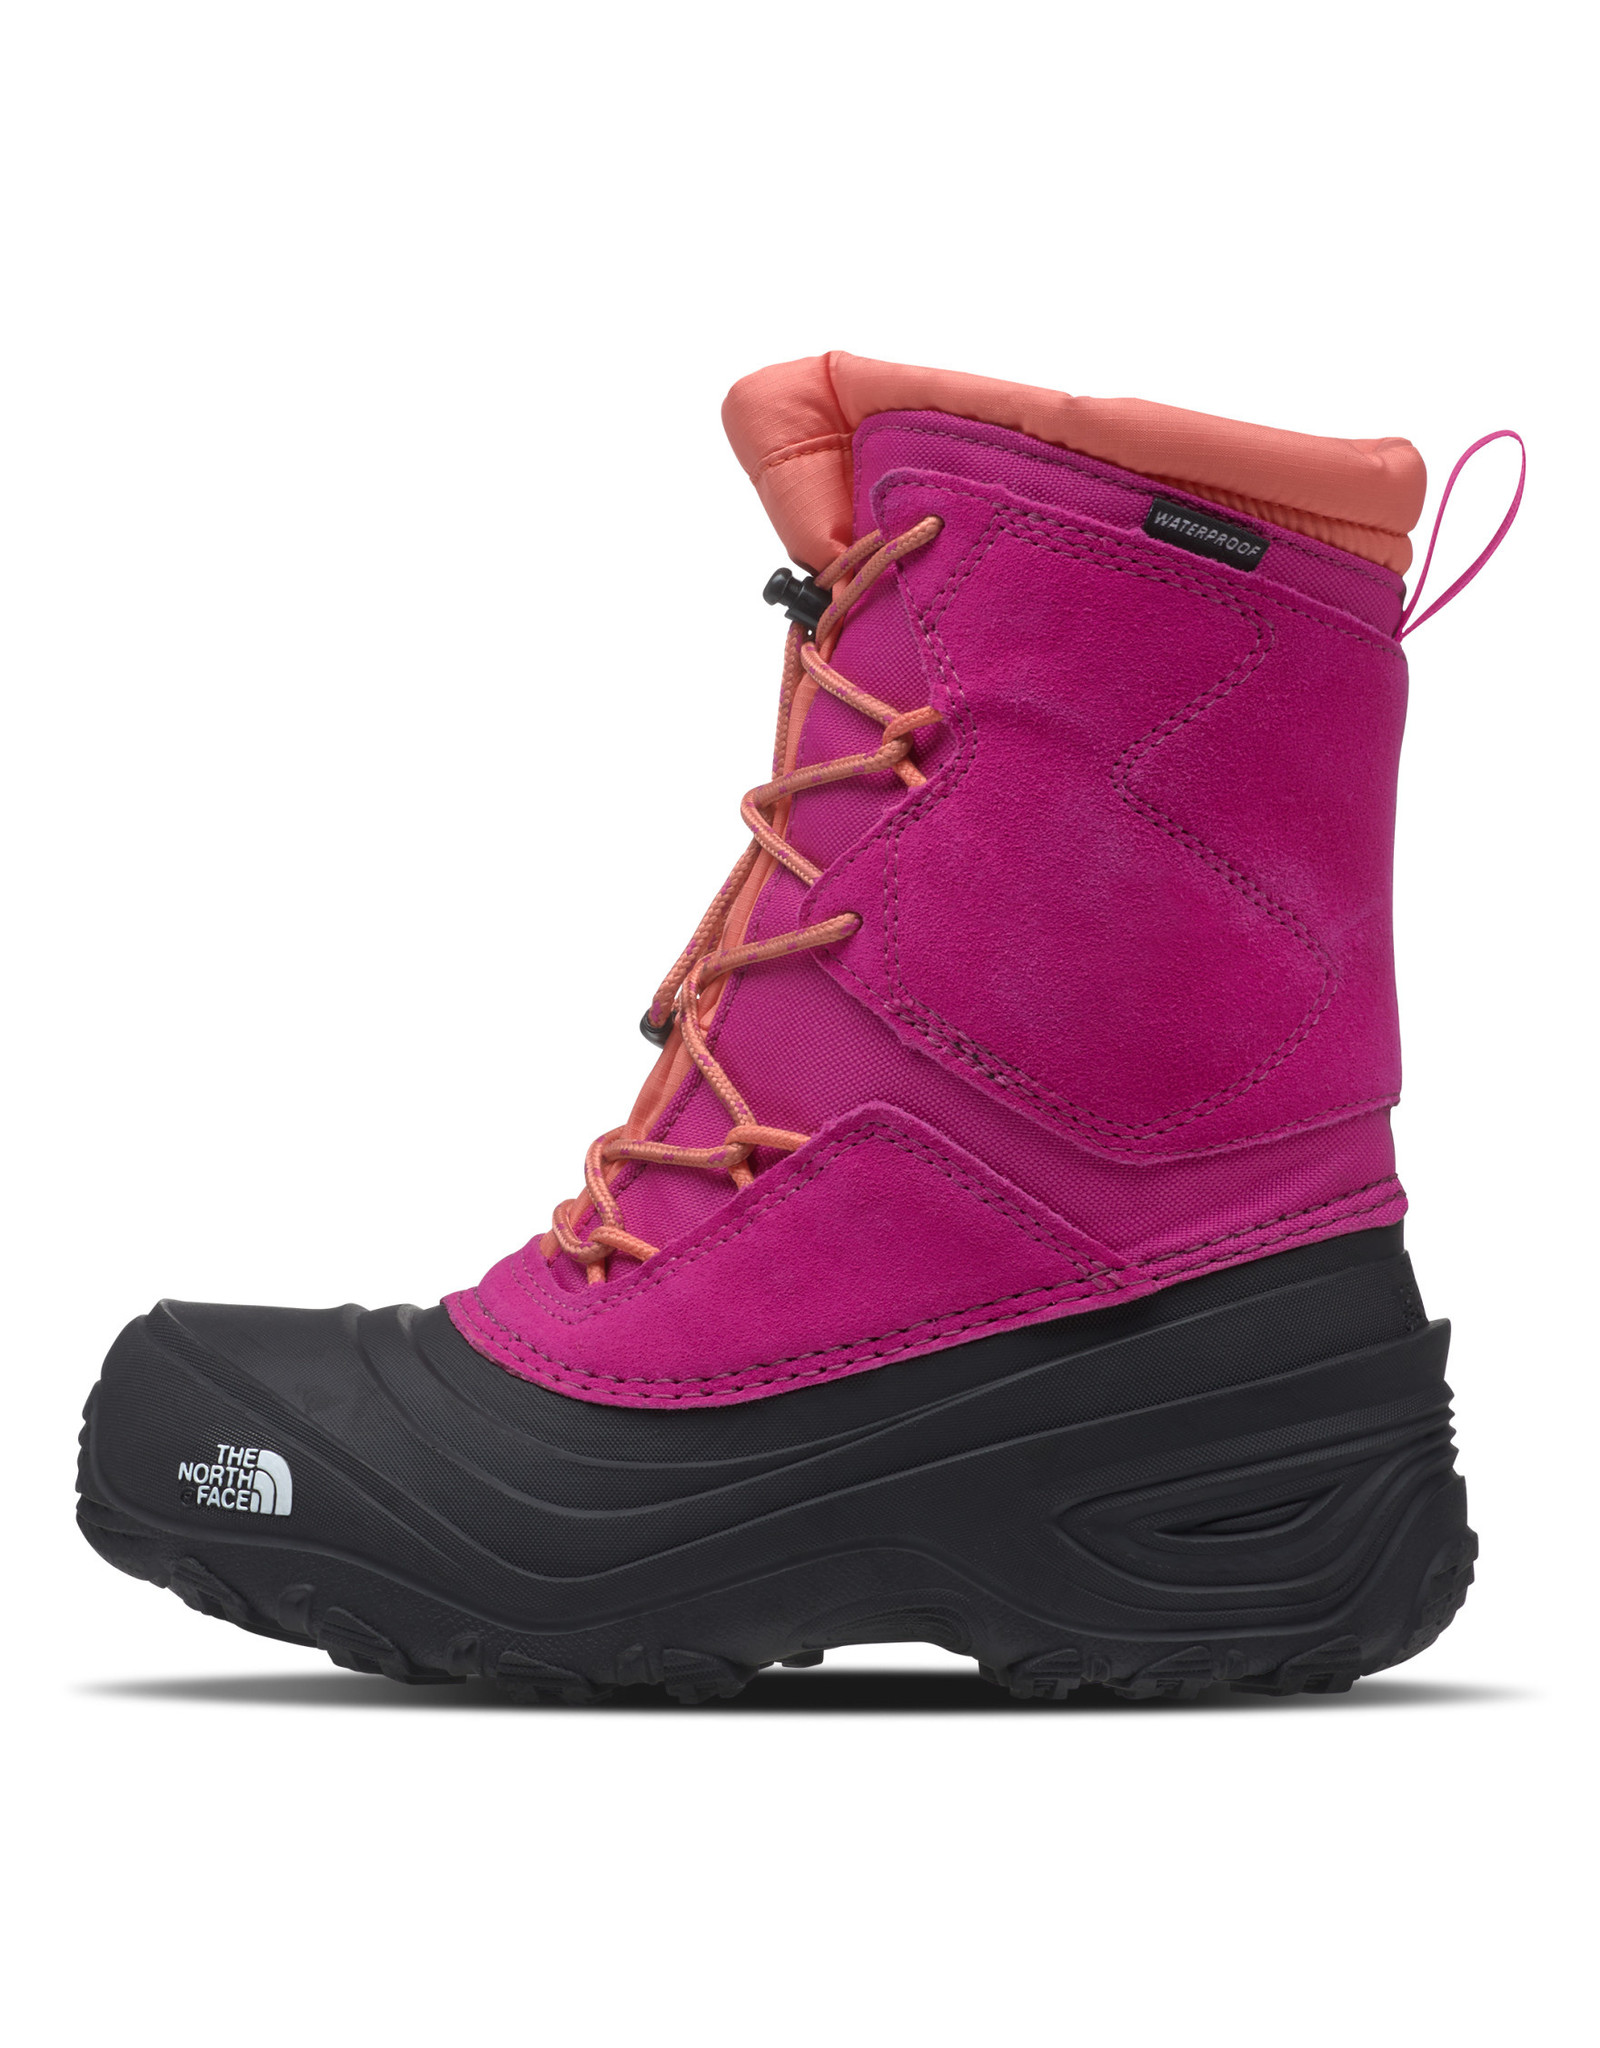 THE NORTH FACE YOUTH ALPENGLOW V WP BOOT